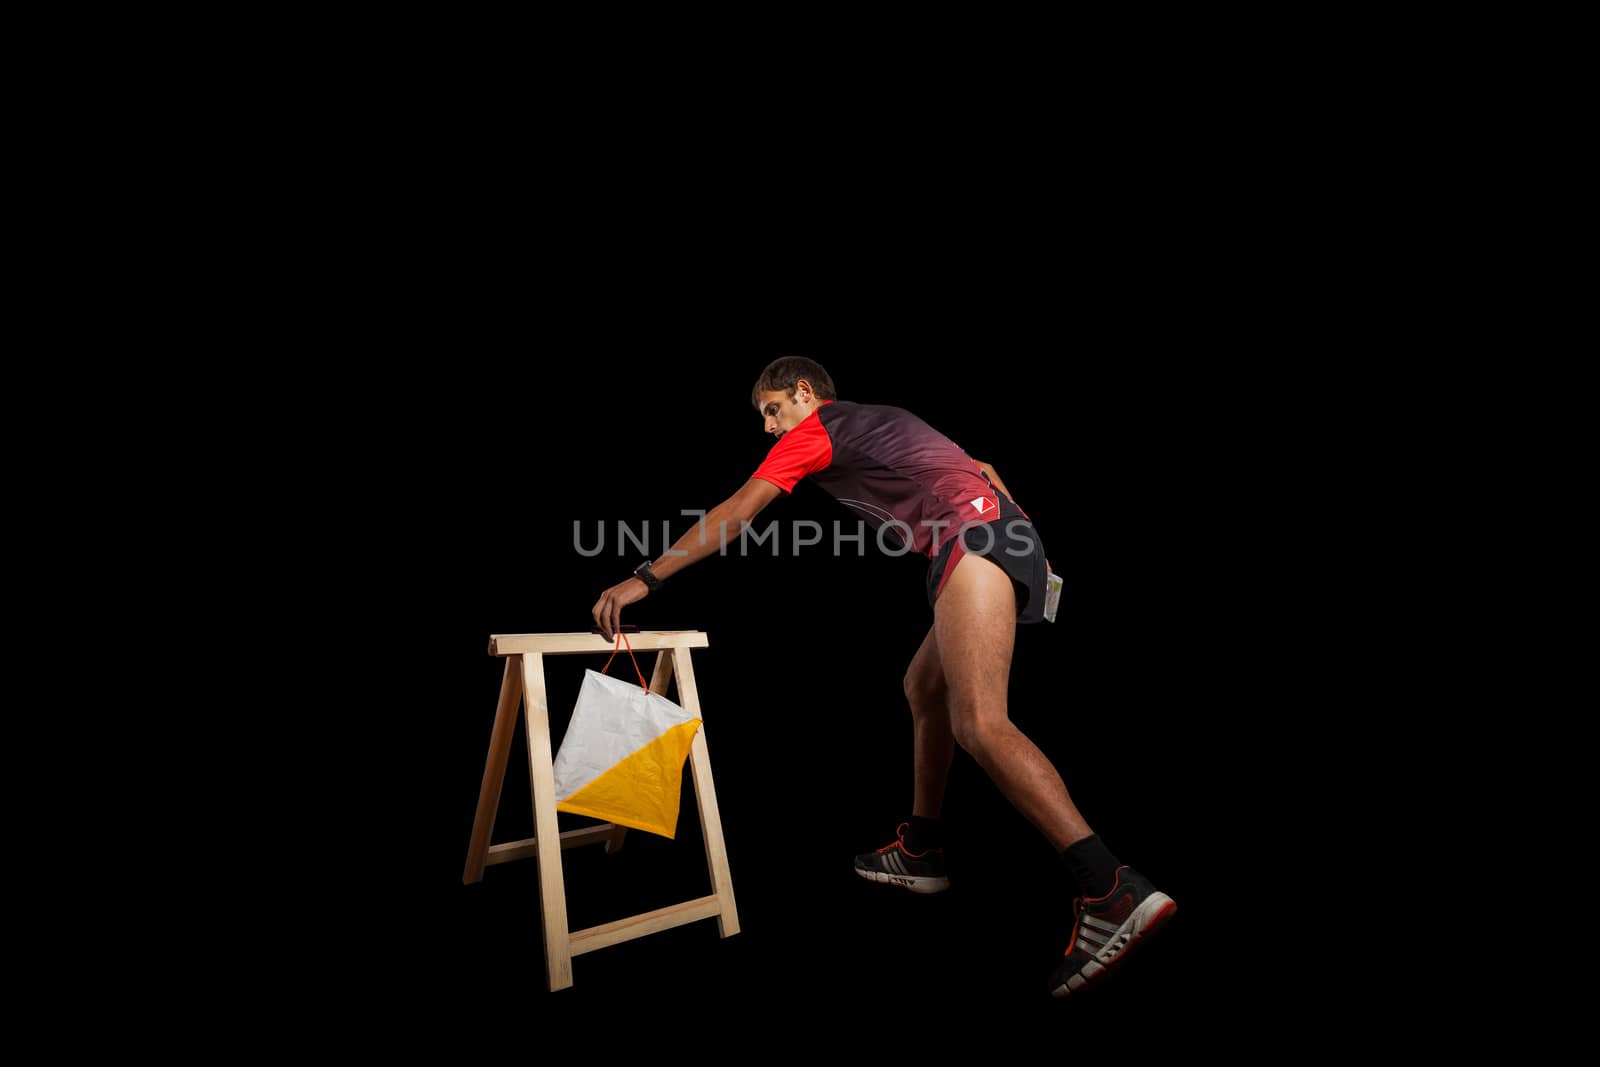 Man punching at control point, taking part in orienteering competitions. Isolated on black. File contains clipping path